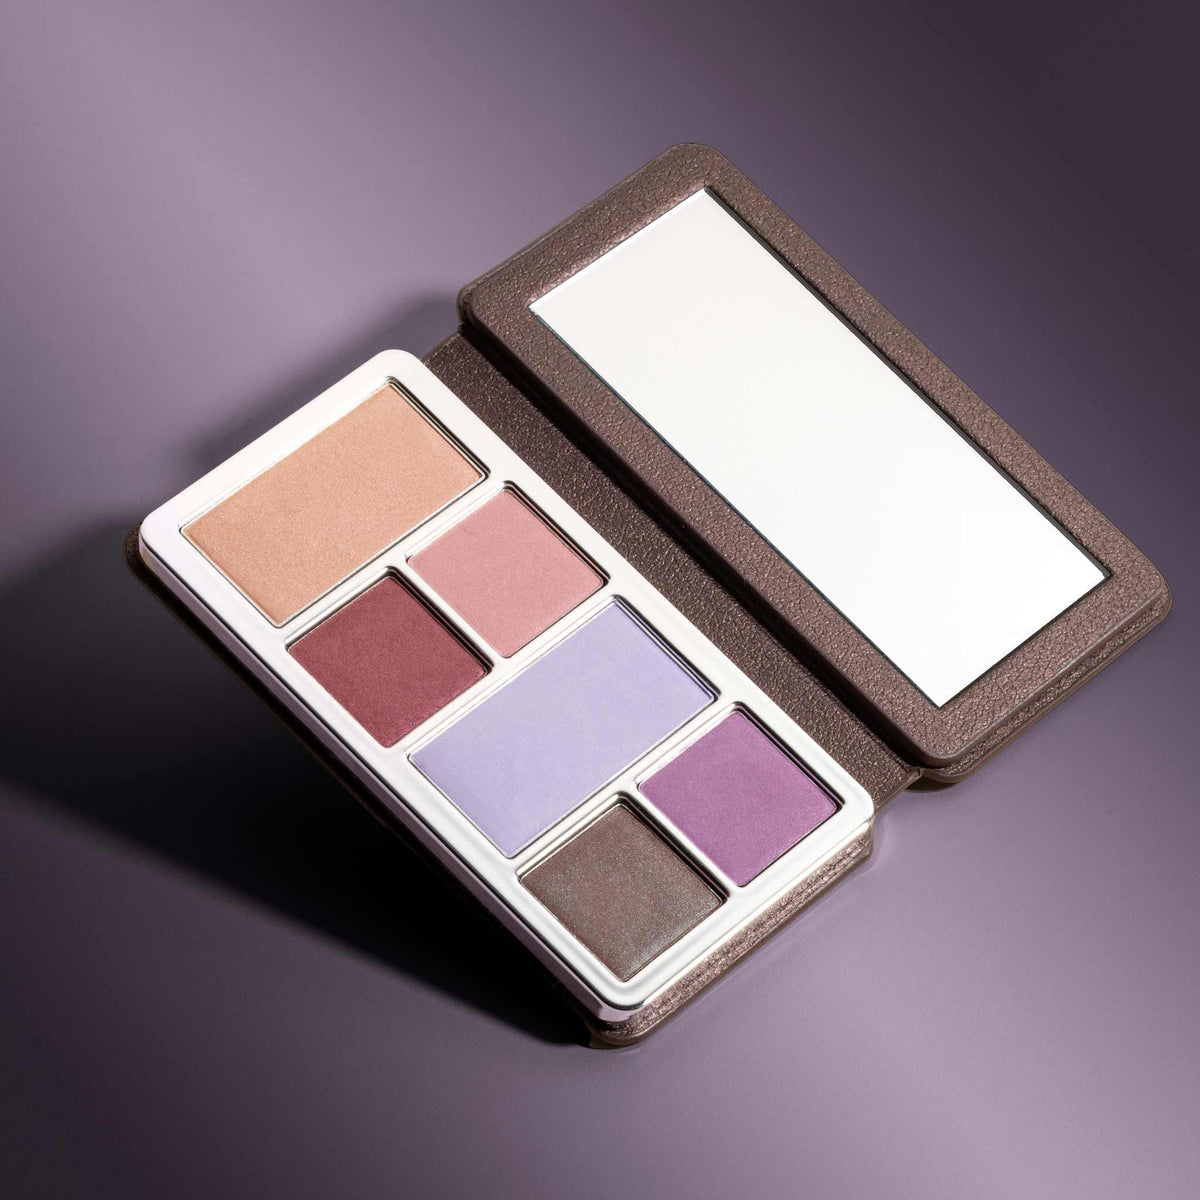 Lune+Aster Violet Solstice Eyeshadow Palette (Limited Edition) . This product is in the color multi